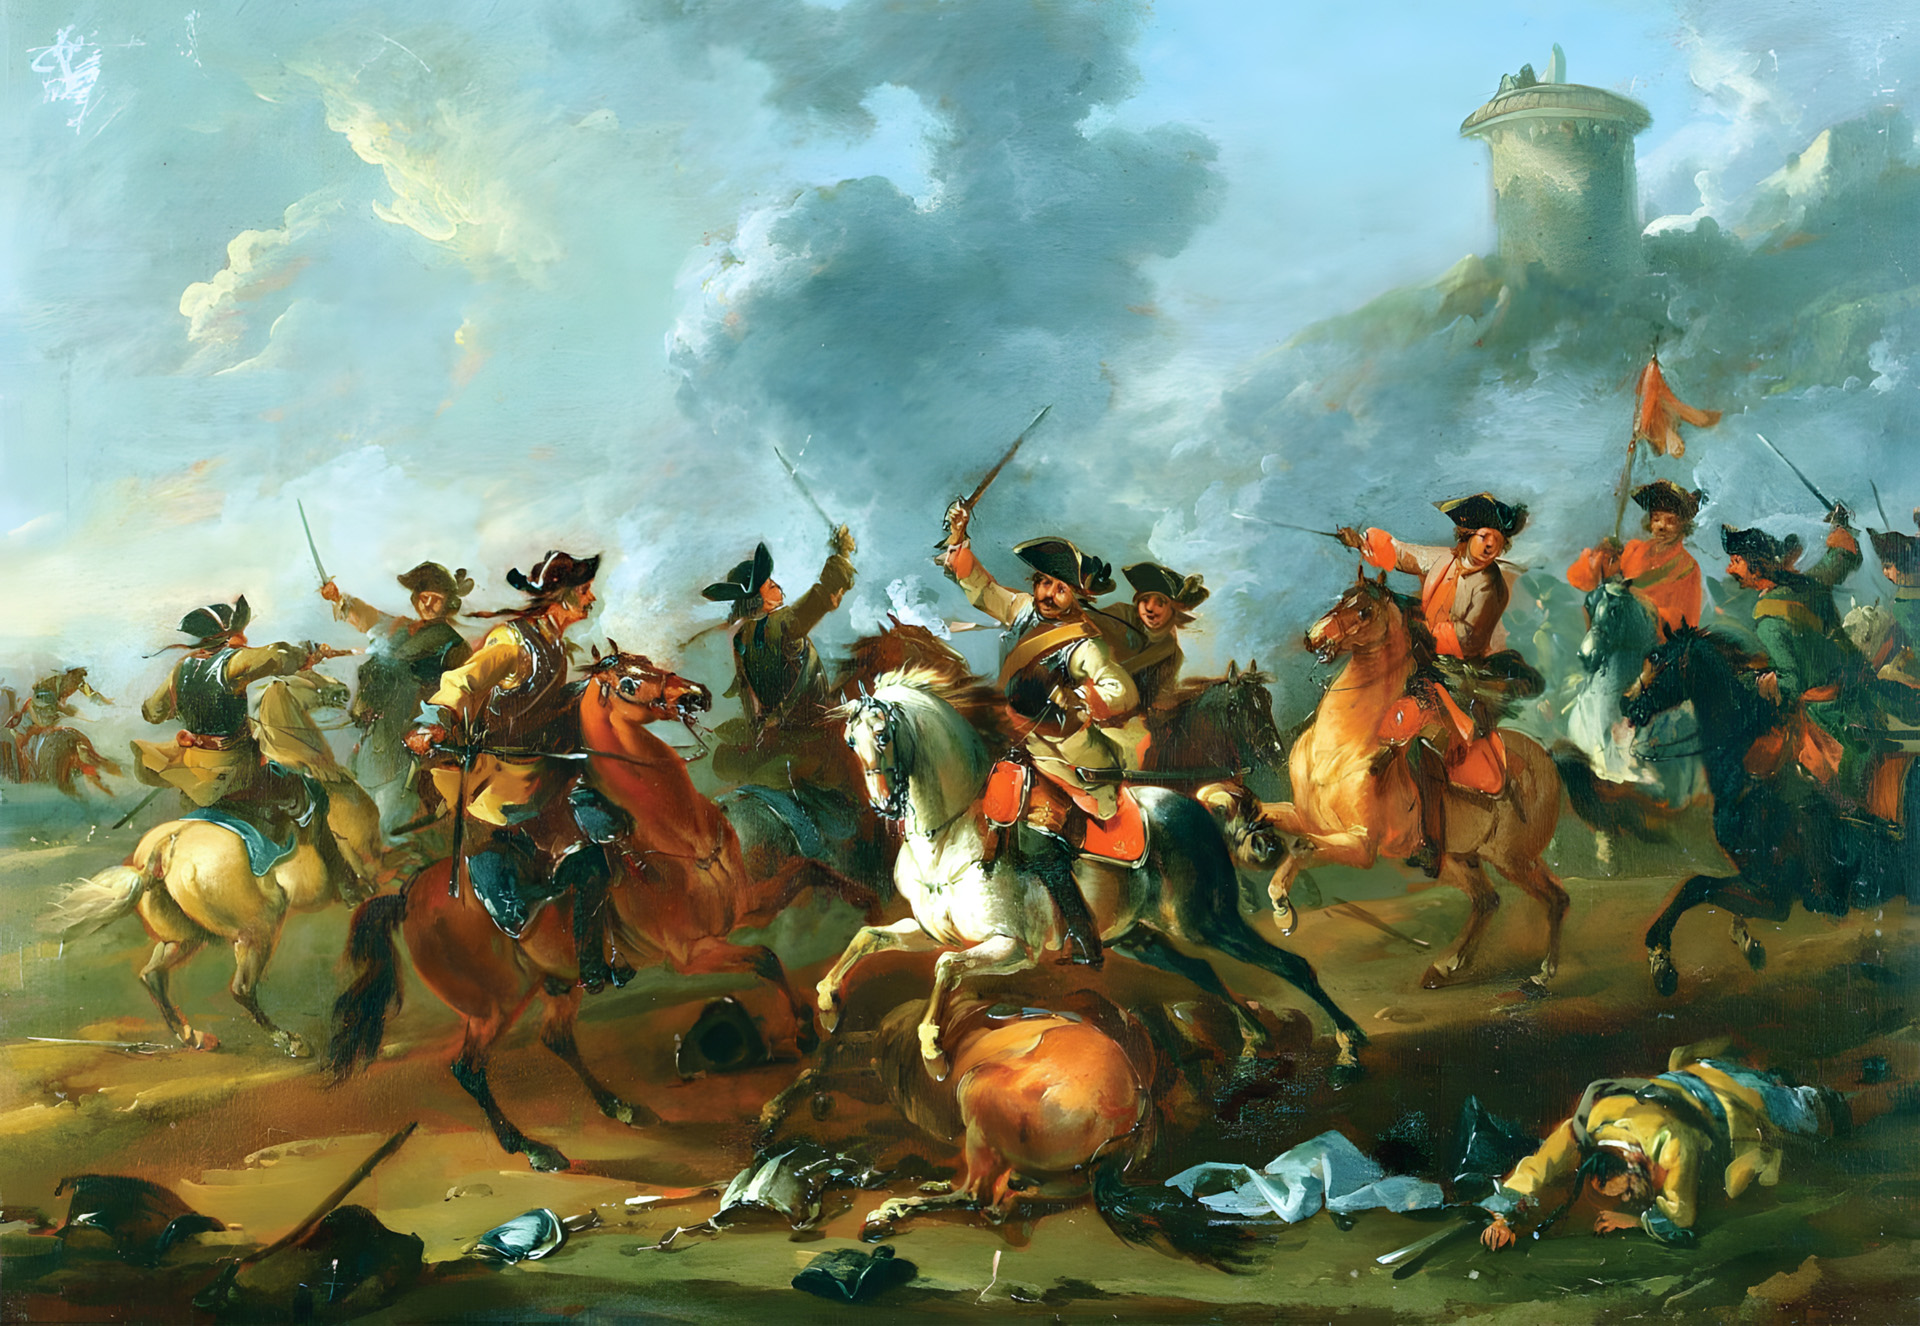 Opposing cavalry skirmish at the Battle of Prague, which Frederick himself called “murderous.”